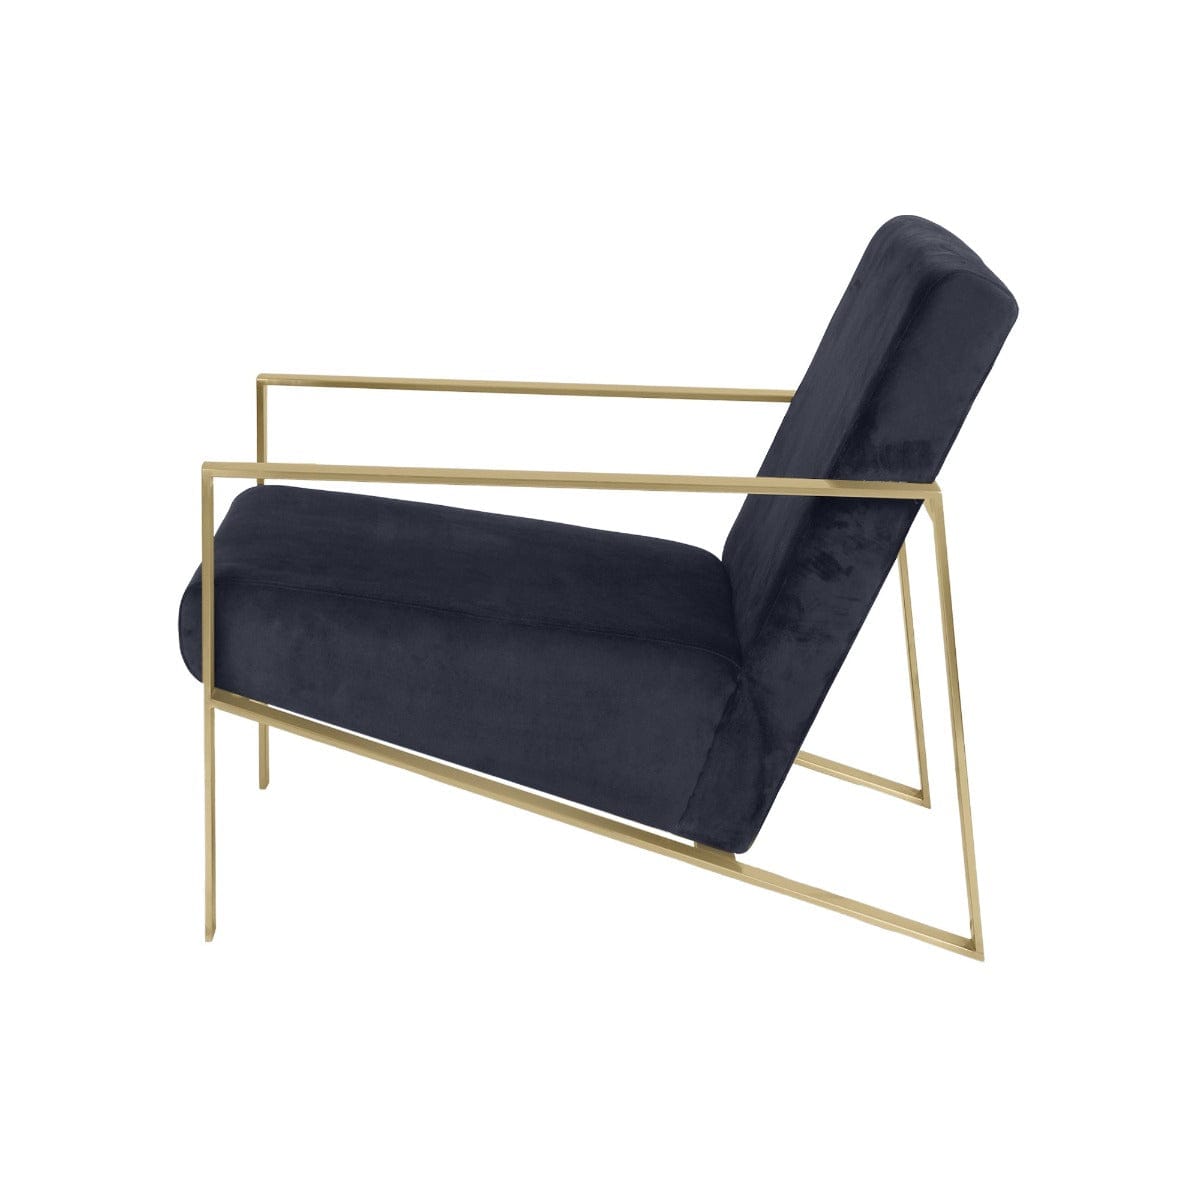 Mosby Dark Grey Velvet Fabric Lounge Chair In Gold Finish